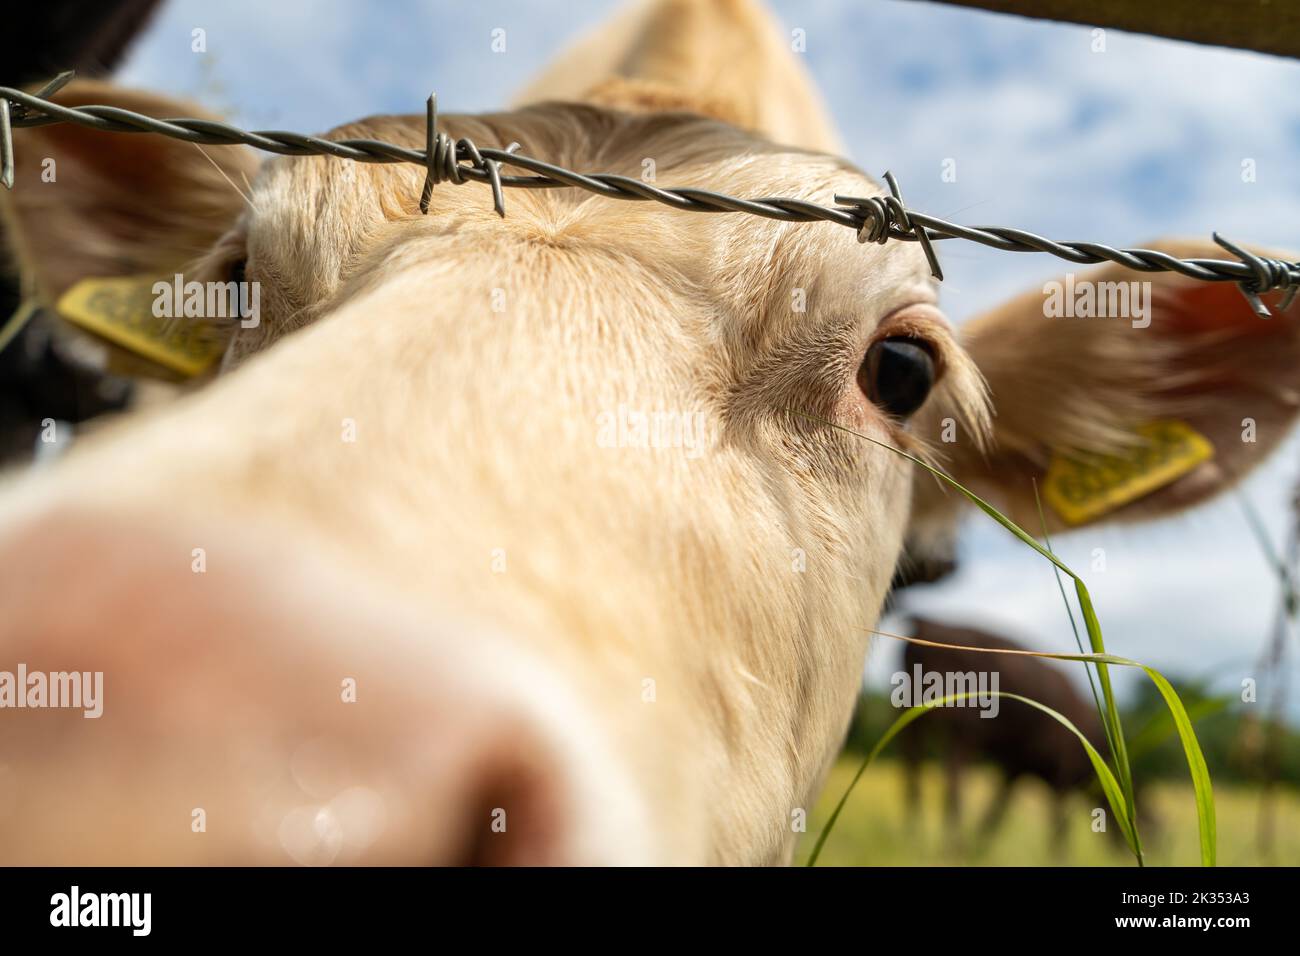 Curious young white cow looking closely to the camera. Stock Photo